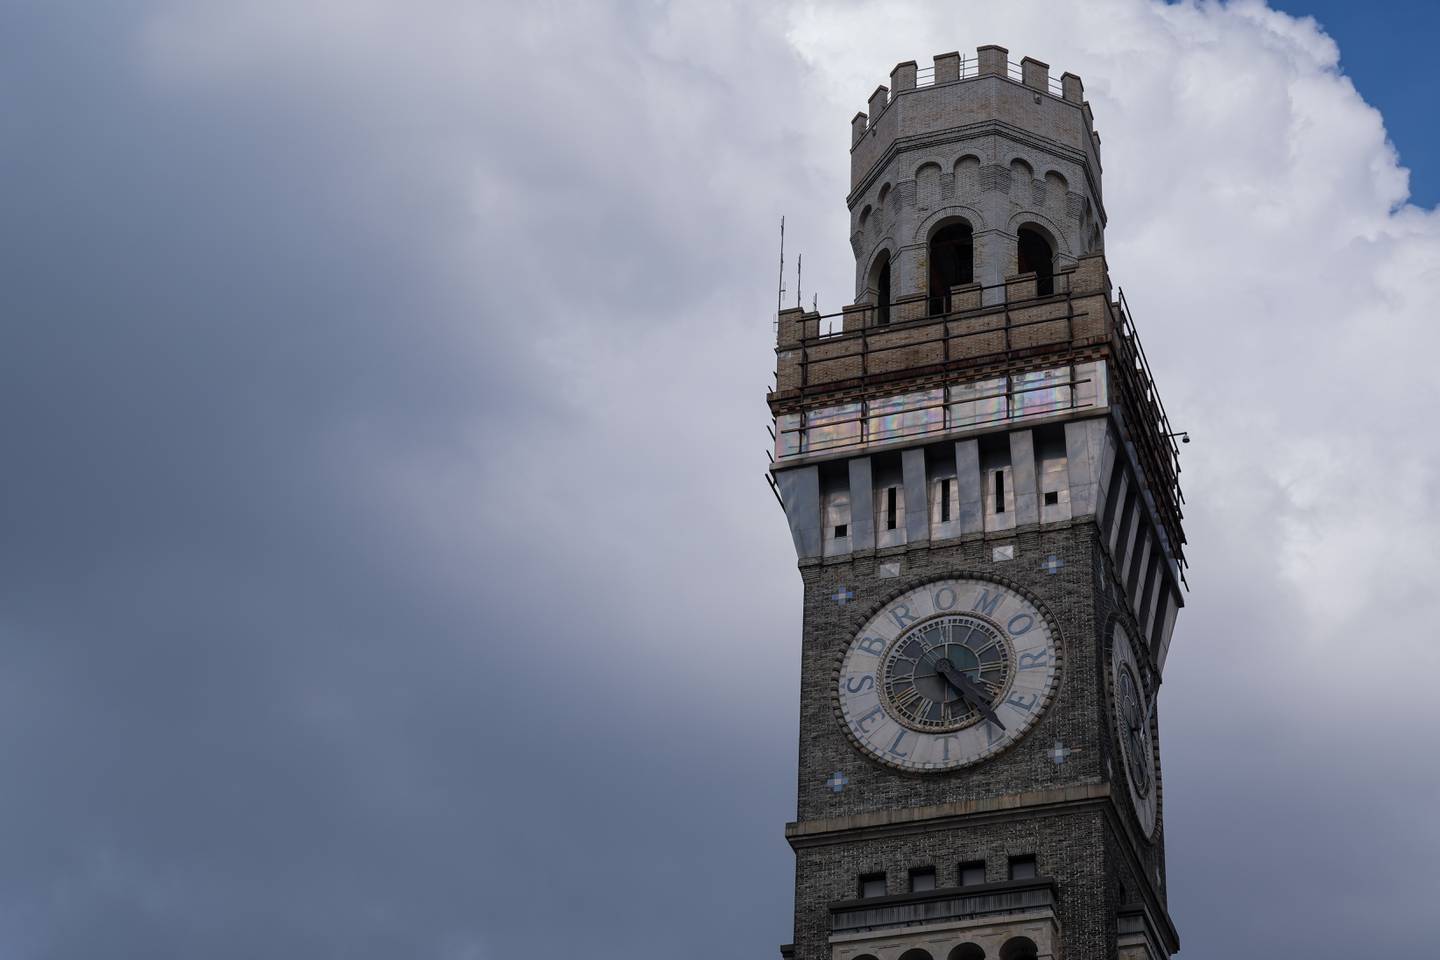 6/8/22—Exterior of the Bromo Seltzer Arts Tower.